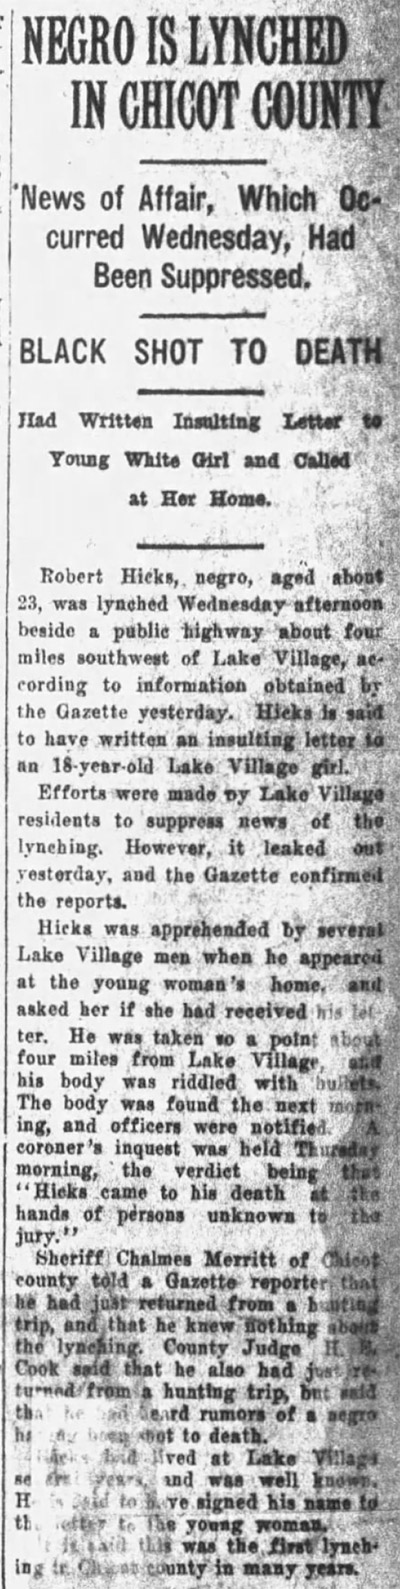 "Negro is lynched in Chicot County" newspaper clipping